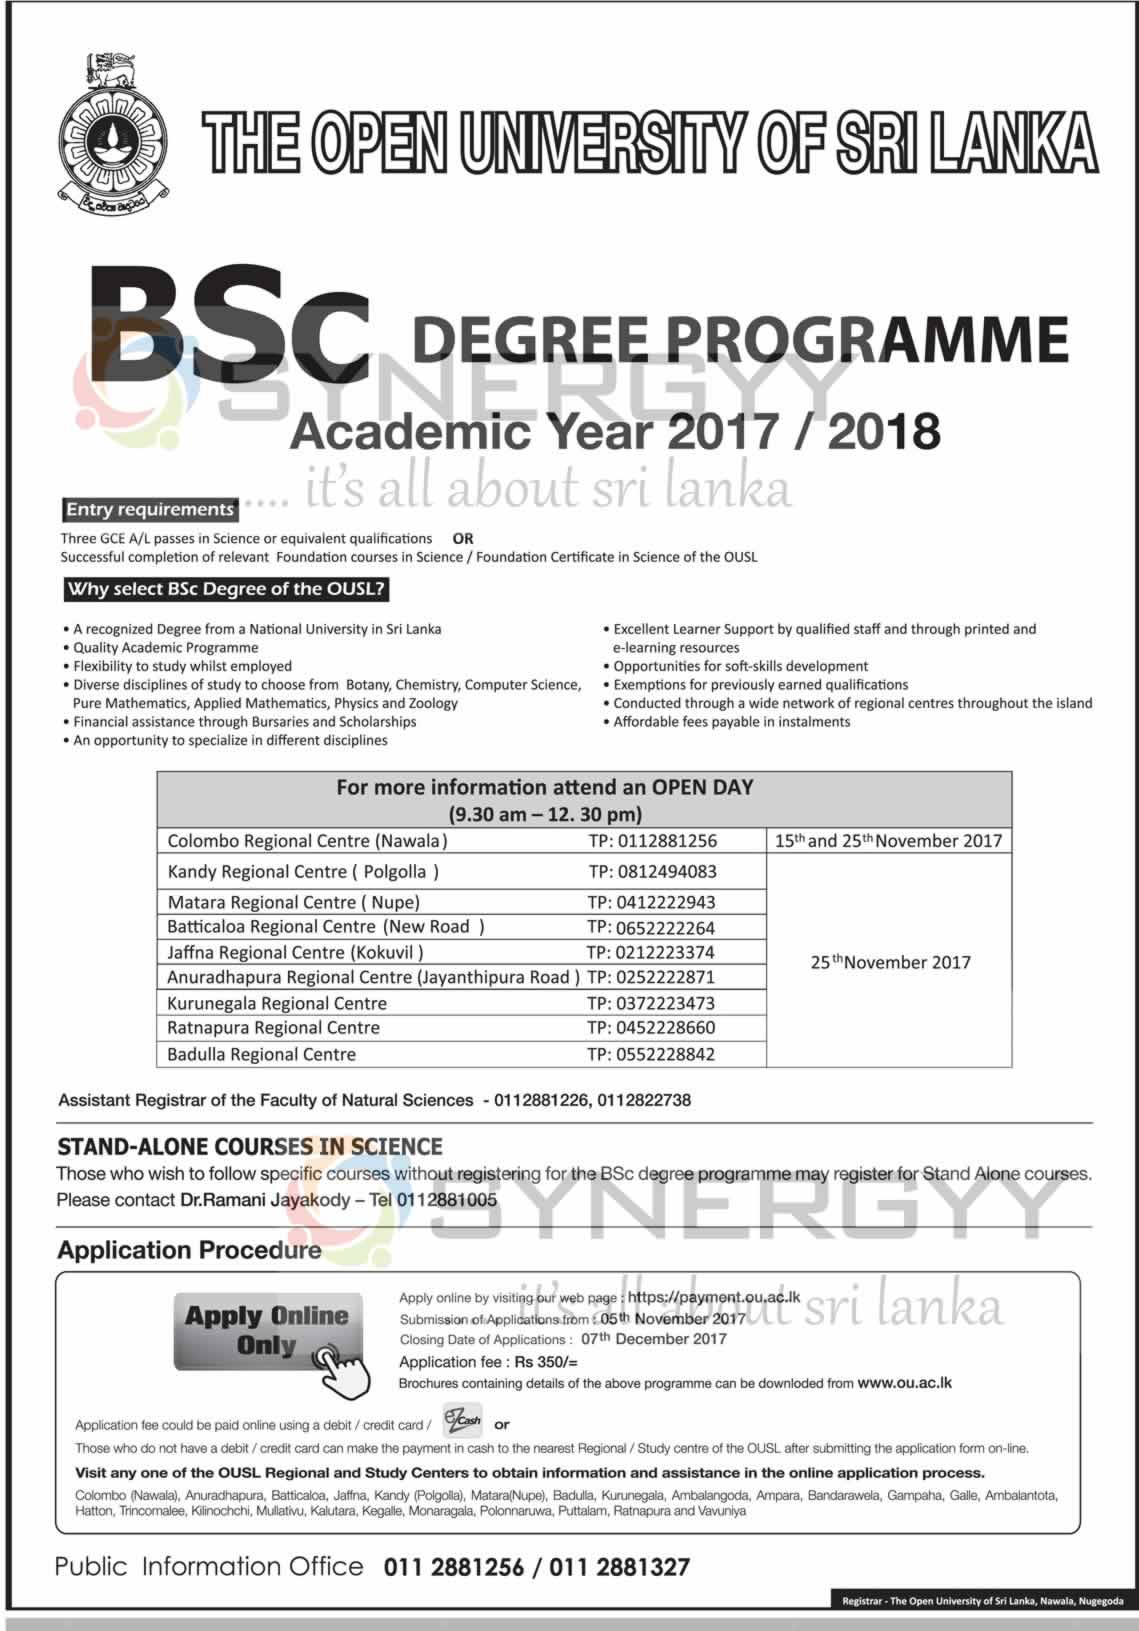 The Open University of Sri Lanka BSc Degree Programme 2017 / 2018 – Applications call now